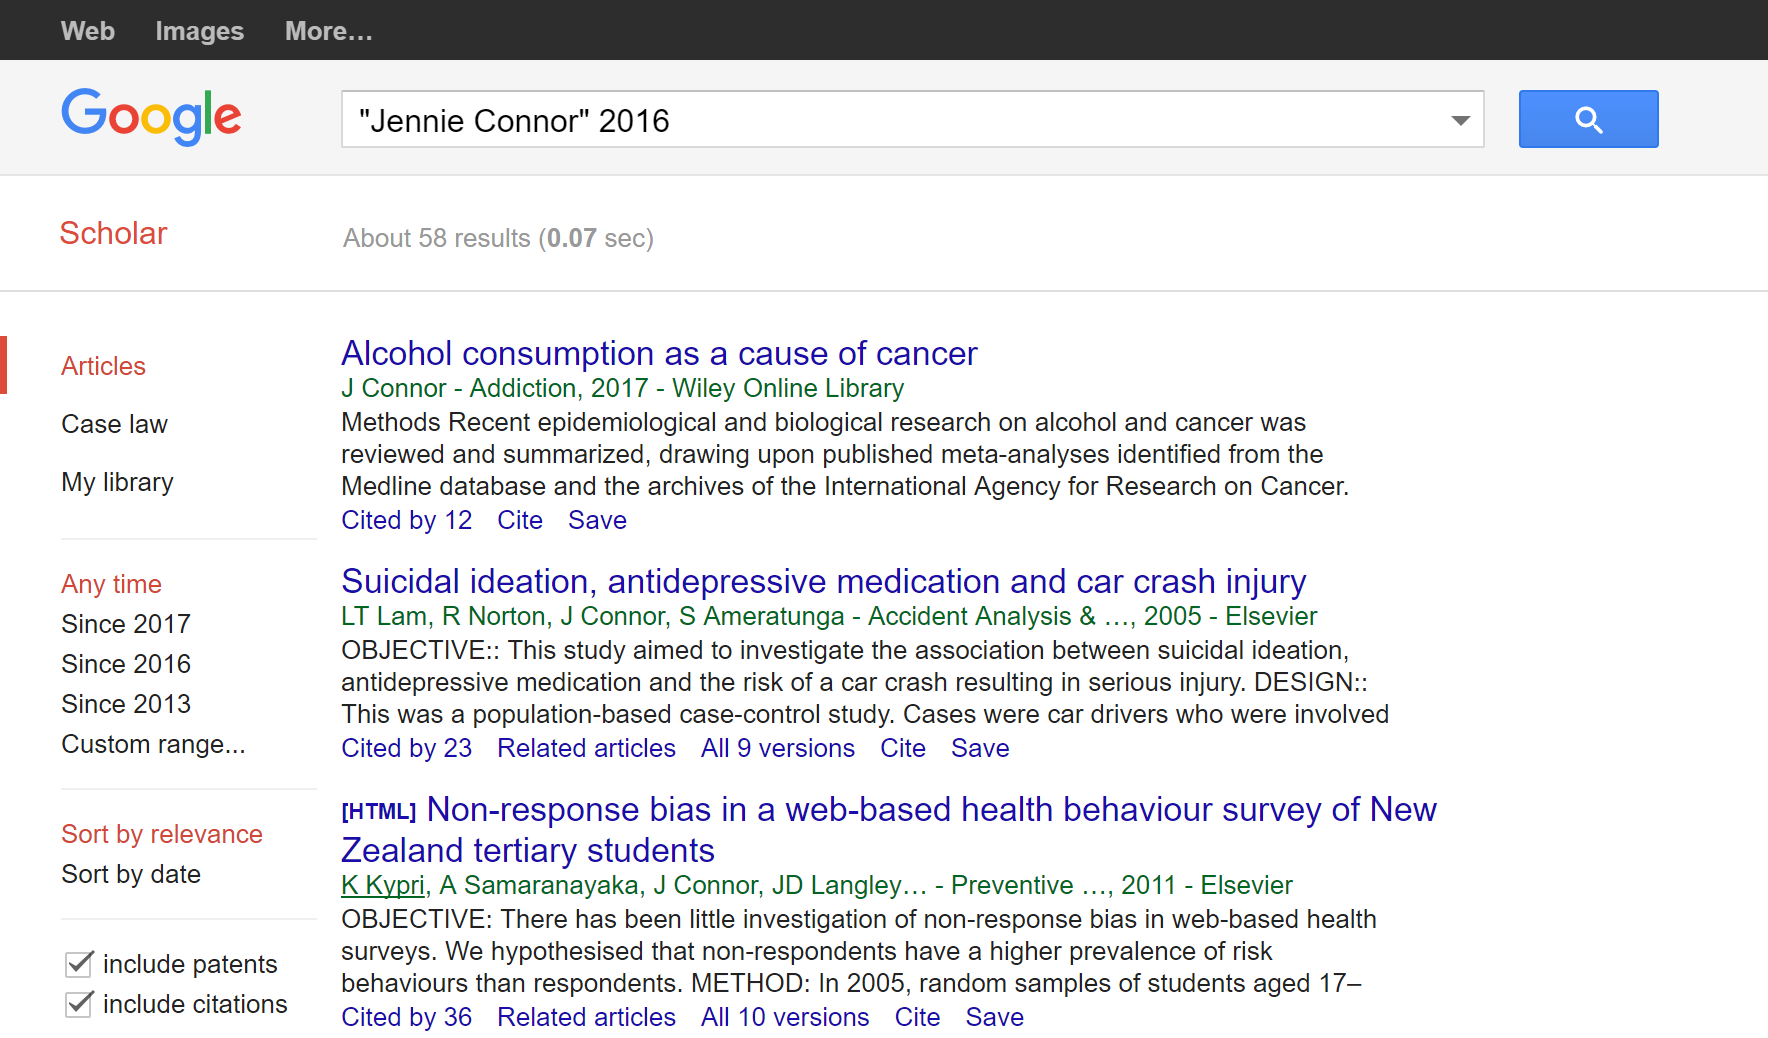 The Google Scholar search results for “Jennie Connor 2016,” which shows her well-cited publications. Her 2017 article received 12 citations, and two articles were cited by 23 and 36 others.